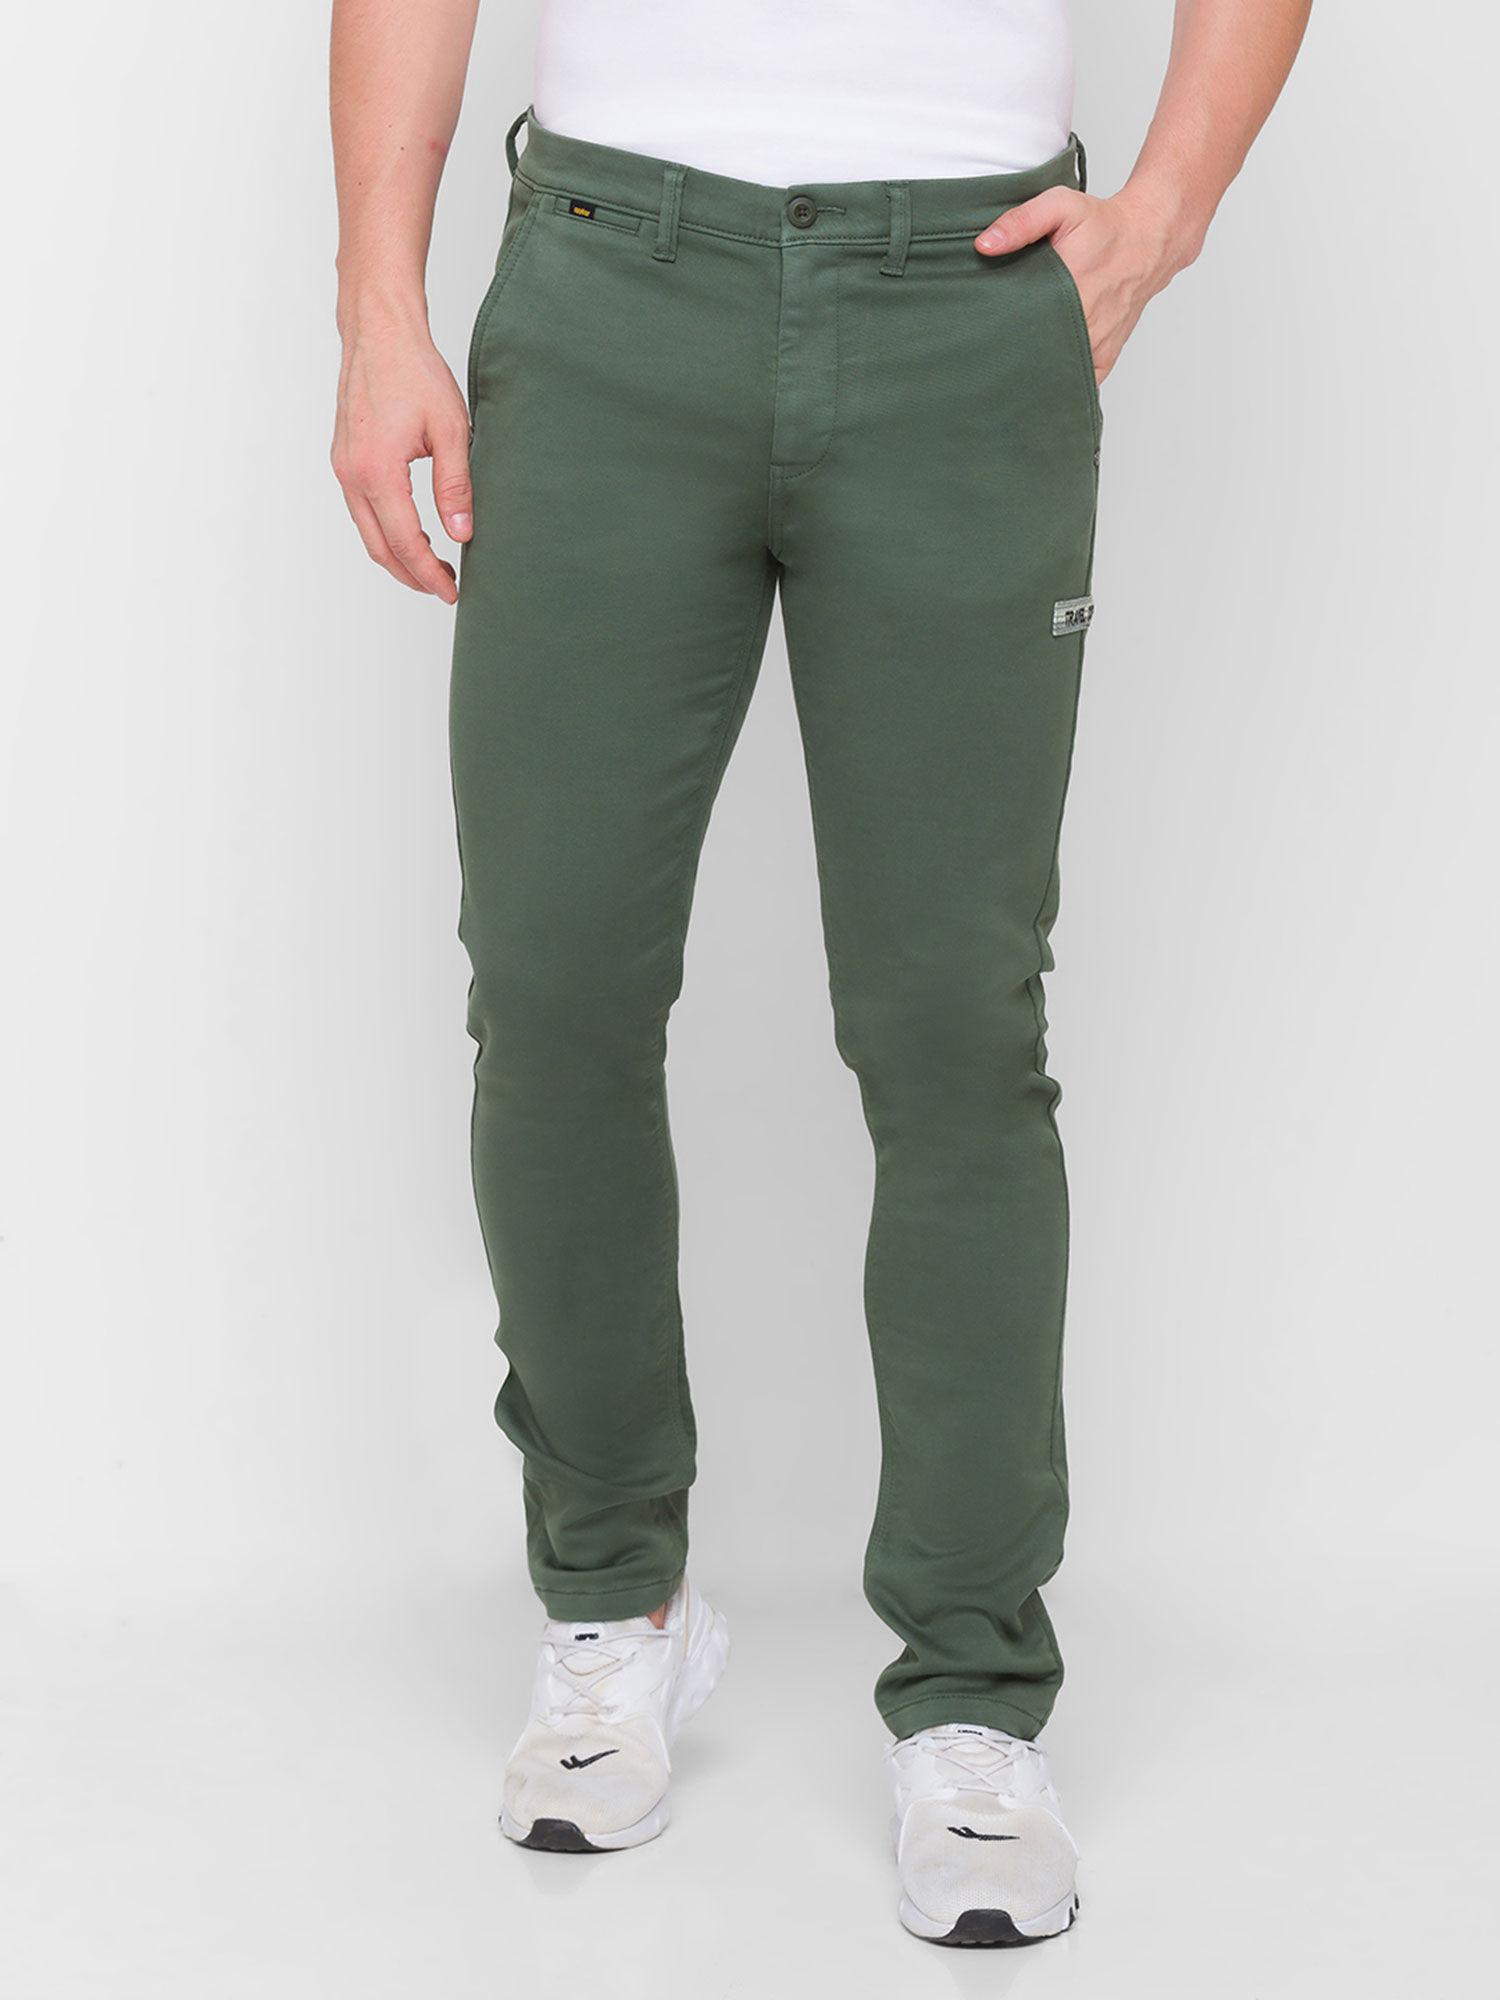 green cotton slim fit trousers for men